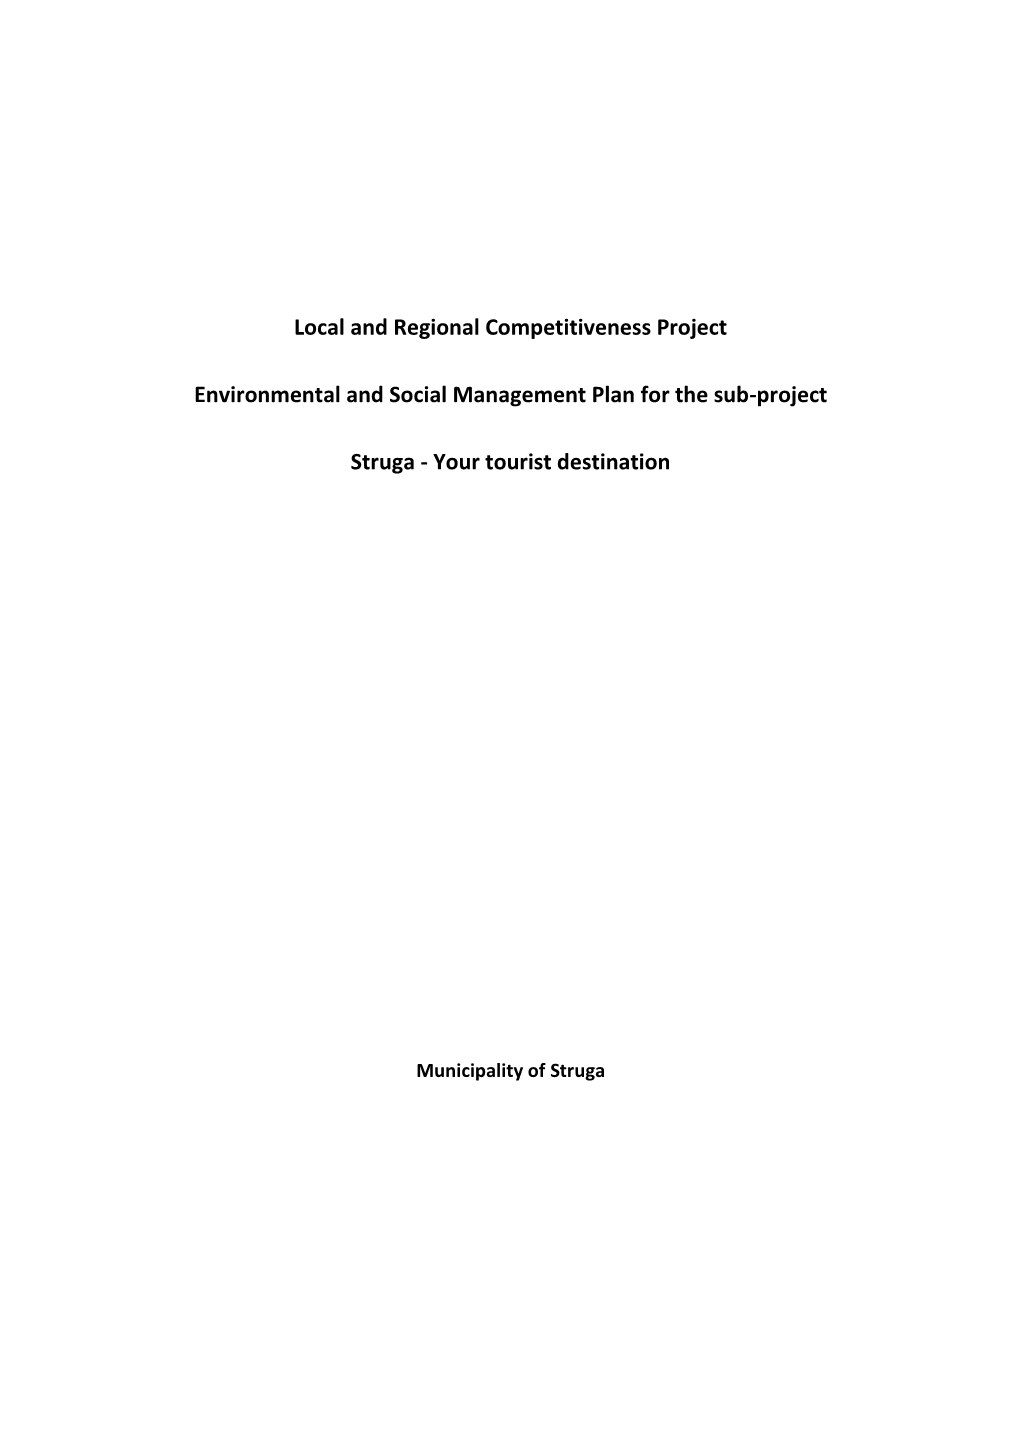 Local and Regional Competitiveness Project Environmental and Social